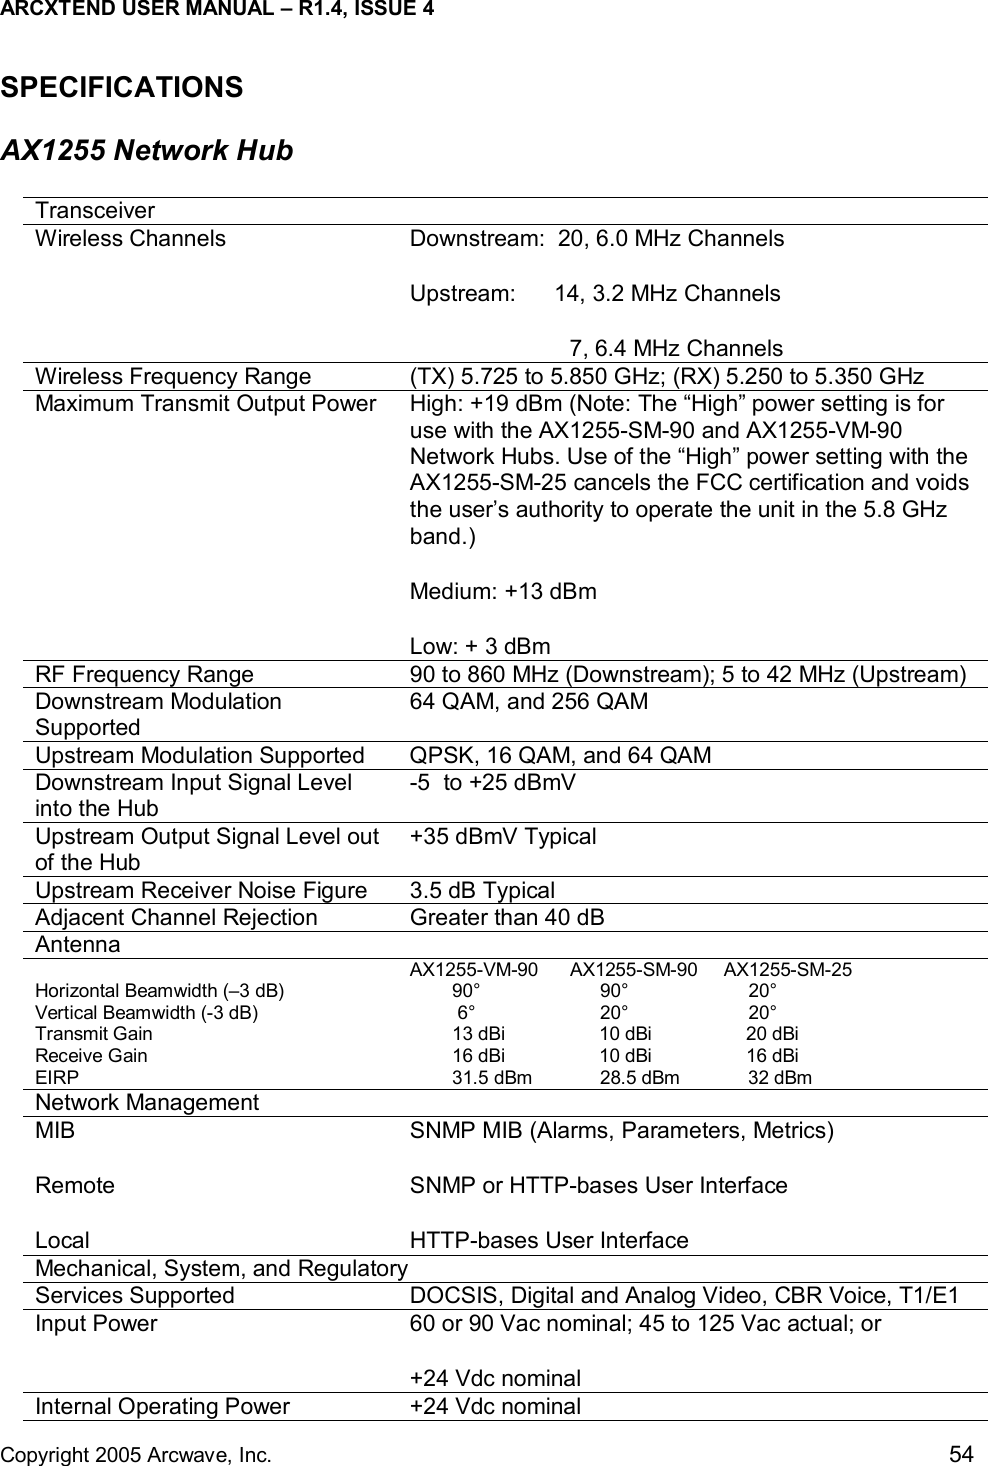 ARCXTEND USER MANUAL – R1.4, ISSUE 4  Copyright 2005 Arcwave, Inc.    54 SPECIFICATIONS AX1255 Network Hub  Transceiver Wireless Channels  Downstream:  20, 6.0 MHz Channels Upstream:      14, 3.2 MHz Channels                           7, 6.4 MHz Channels Wireless Frequency Range     (TX) 5.725 to 5.850 GHz; (RX) 5.250 to 5.350 GHz Maximum Transmit Output Power   High: +19 dBm (Note: The “High” power setting is for use with the AX1255-SM-90 and AX1255-VM-90 Network Hubs. Use of the “High” power setting with the AX1255-SM-25 cancels the FCC certification and voids the user’s authority to operate the unit in the 5.8 GHz band.) Medium: +13 dBm Low: + 3 dBm RF Frequency Range  90 to 860 MHz (Downstream); 5 to 42 MHz (Upstream) Downstream Modulation Supported   64 QAM, and 256 QAM Upstream Modulation Supported  QPSK, 16 QAM, and 64 QAM Downstream Input Signal Level into the Hub -5  to +25 dBmV Upstream Output Signal Level out of the Hub +35 dBmV Typical Upstream Receiver Noise Figure  3.5 dB Typical Adjacent Channel Rejection   Greater than 40 dB Antenna   Horizontal Beamwidth (–3 dB) Vertical Beamwidth (-3 dB) Transmit Gain Receive Gain EIRP AX1255-VM-90      AX1255-SM-90     AX1255-SM-25         90°                       90°                       20°          6°                        20°                       20°                                       13 dBi                  10 dBi                  20 dBi         16 dBi                  10 dBi                  16 dBi         31.5 dBm             28.5 dBm             32 dBm Network Management   MIB  Remote  Local SNMP MIB (Alarms, Parameters, Metrics) SNMP or HTTP-bases User Interface  HTTP-bases User Interface Mechanical, System, and Regulatory Services Supported  DOCSIS, Digital and Analog Video, CBR Voice, T1/E1 Input Power  60 or 90 Vac nominal; 45 to 125 Vac actual; or +24 Vdc nominal Internal Operating Power  +24 Vdc nominal 